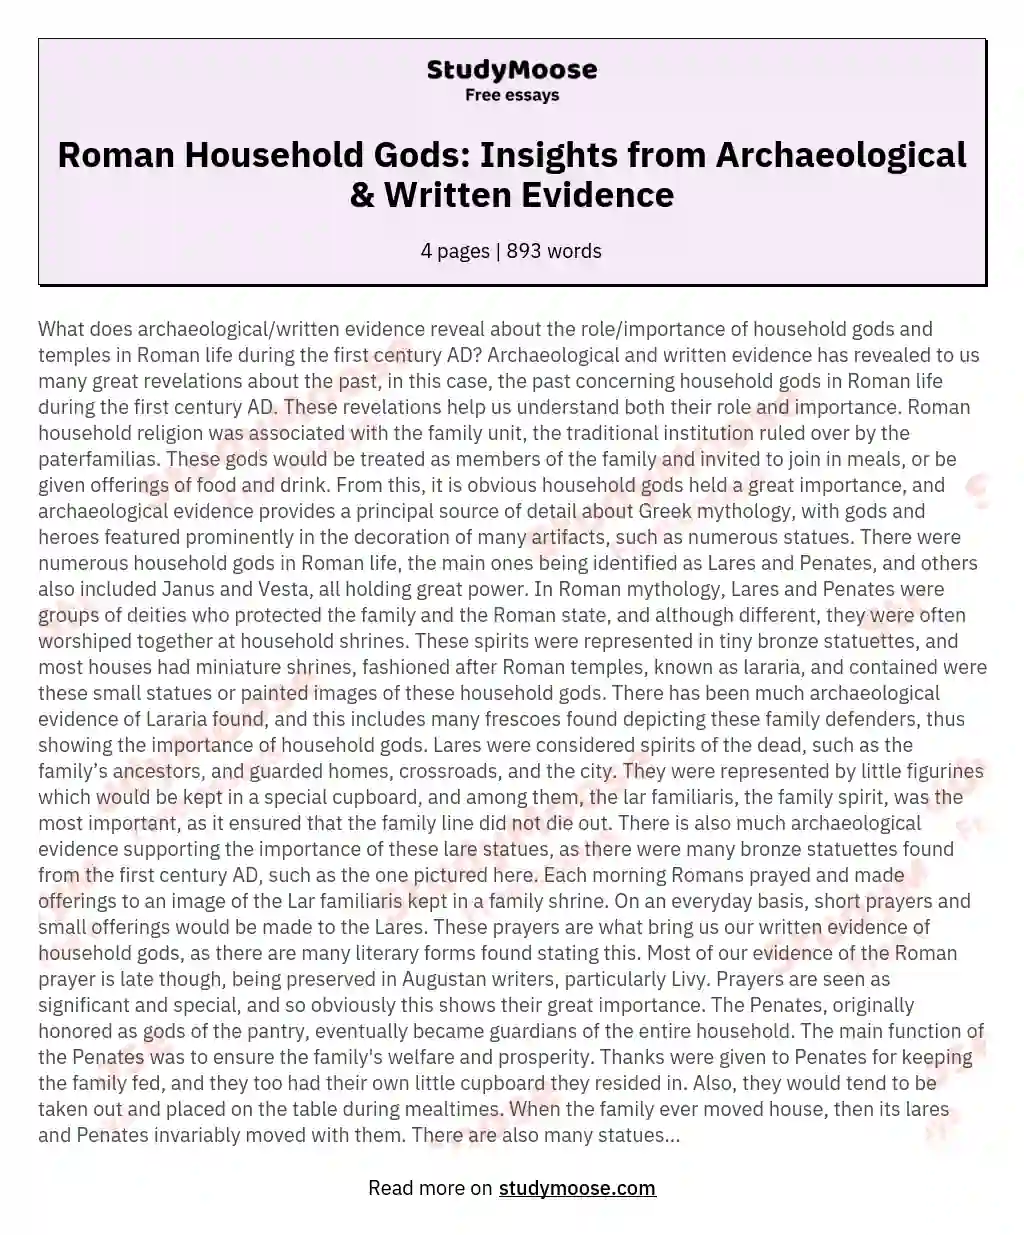 Roman Household Gods: Insights from Archaeological & Written Evidence essay